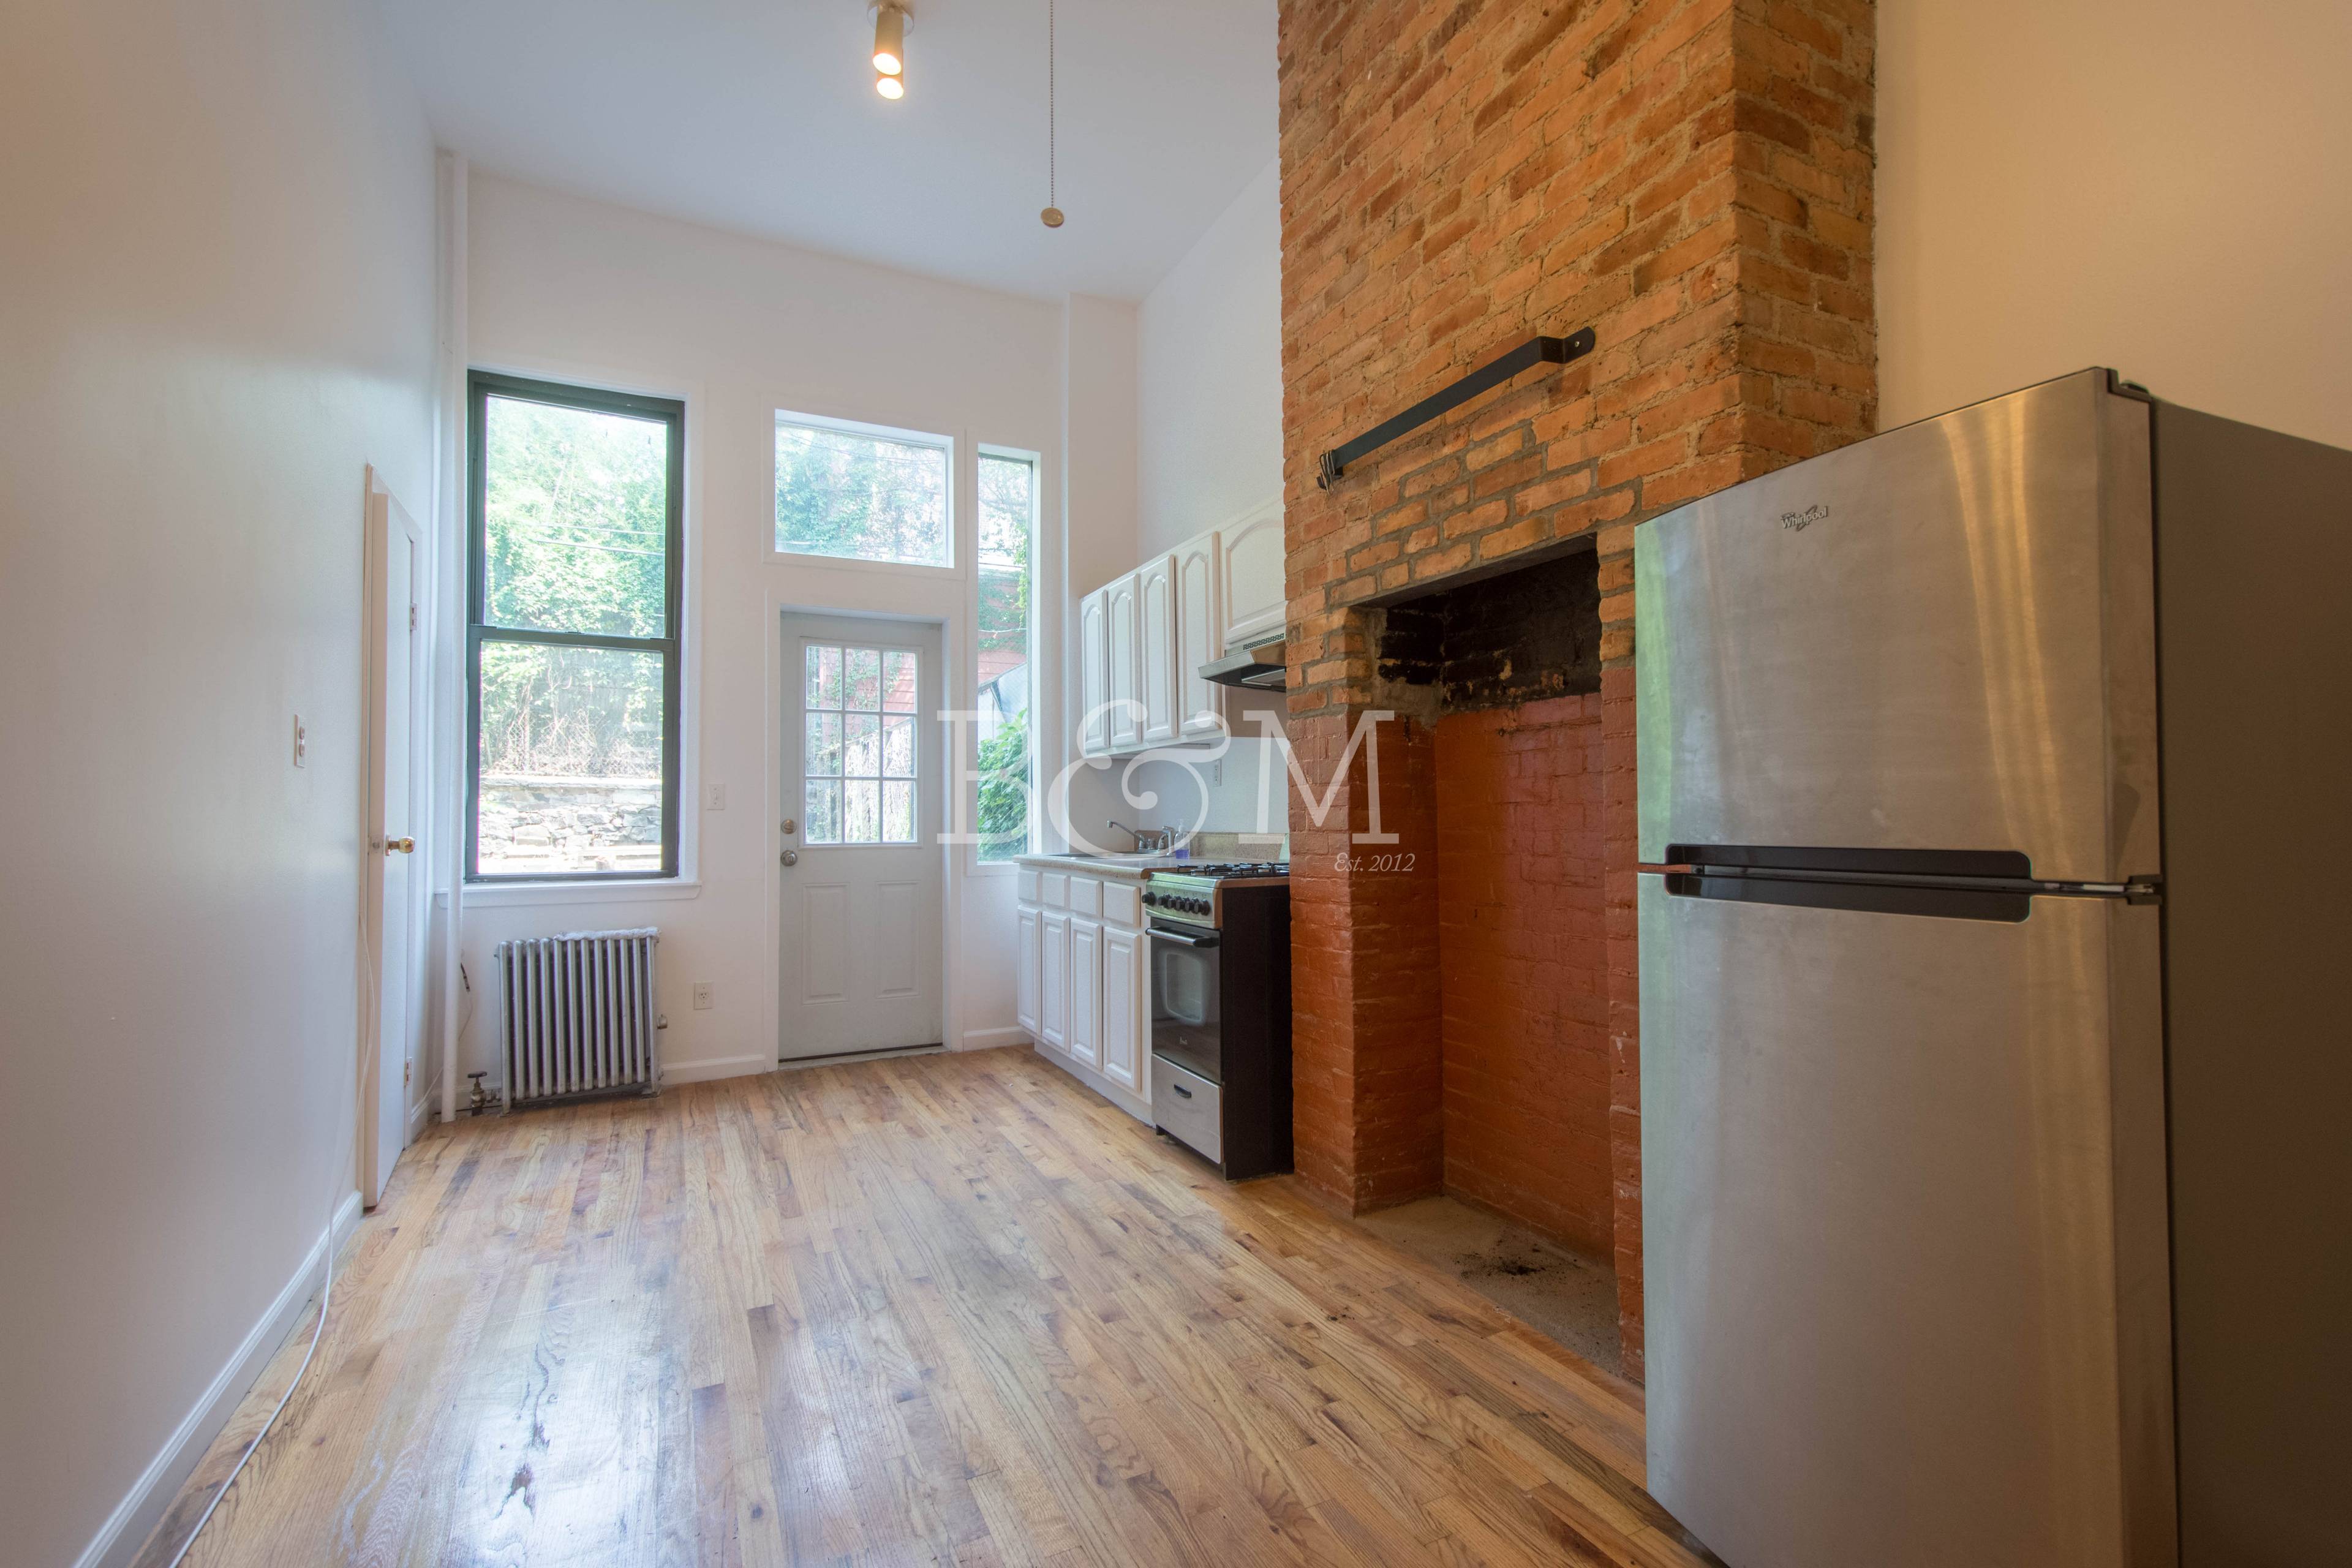 Our Thoughts This Massive Two bedroom Railroad apartment with private backyard in Williamsburg, Brooklyn.